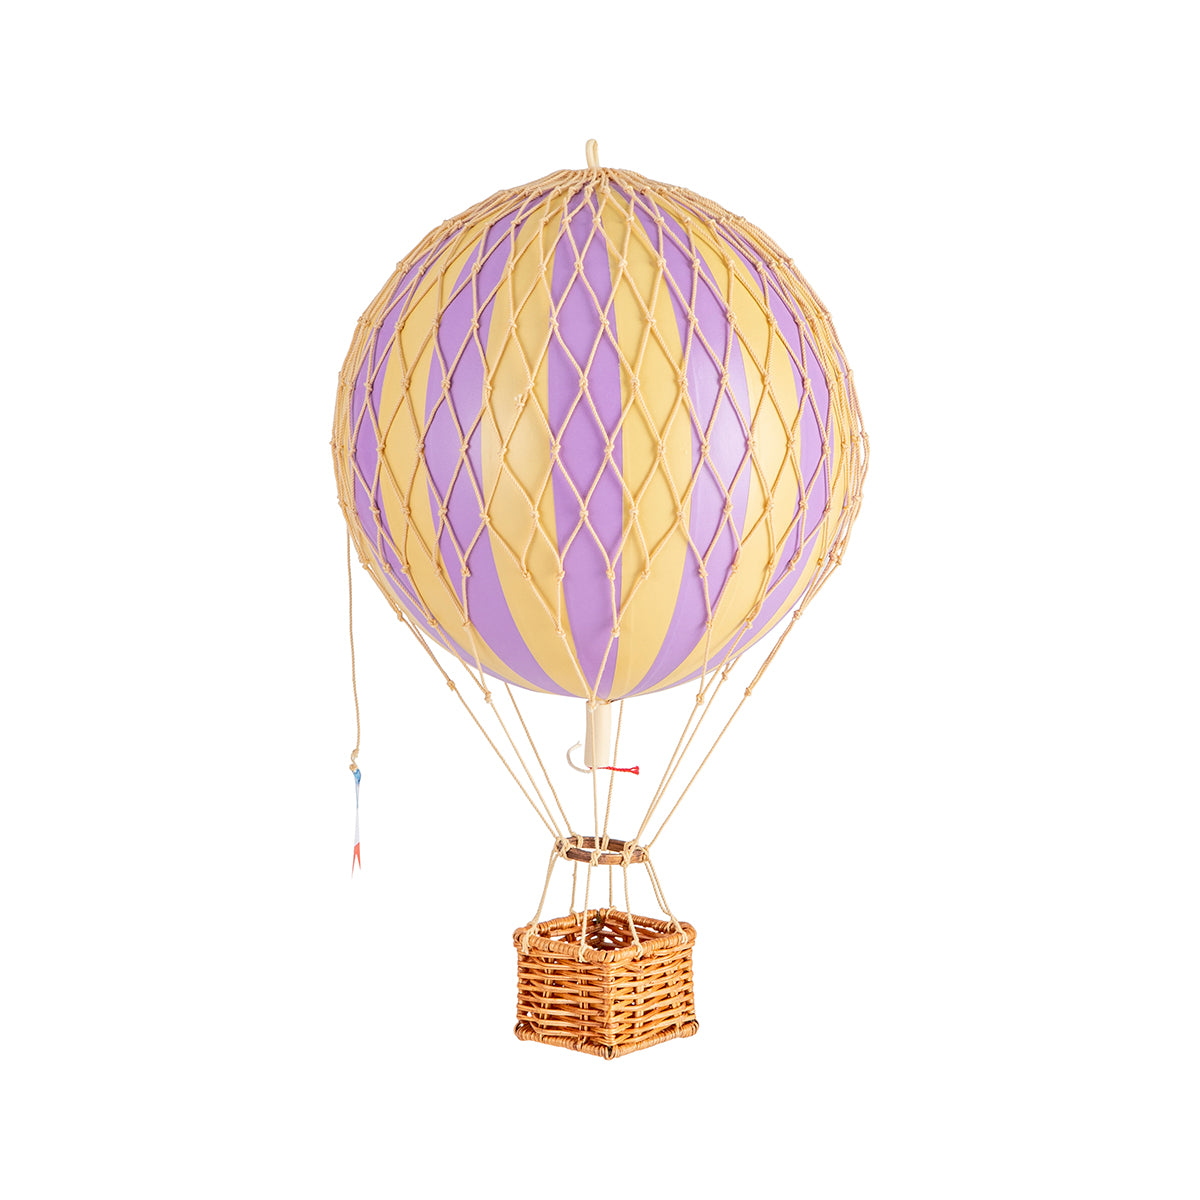 A quirky Wonderen Small Hot Air Balloon - Travels Light with a wicker basket in vibrant purple and yellow hues.